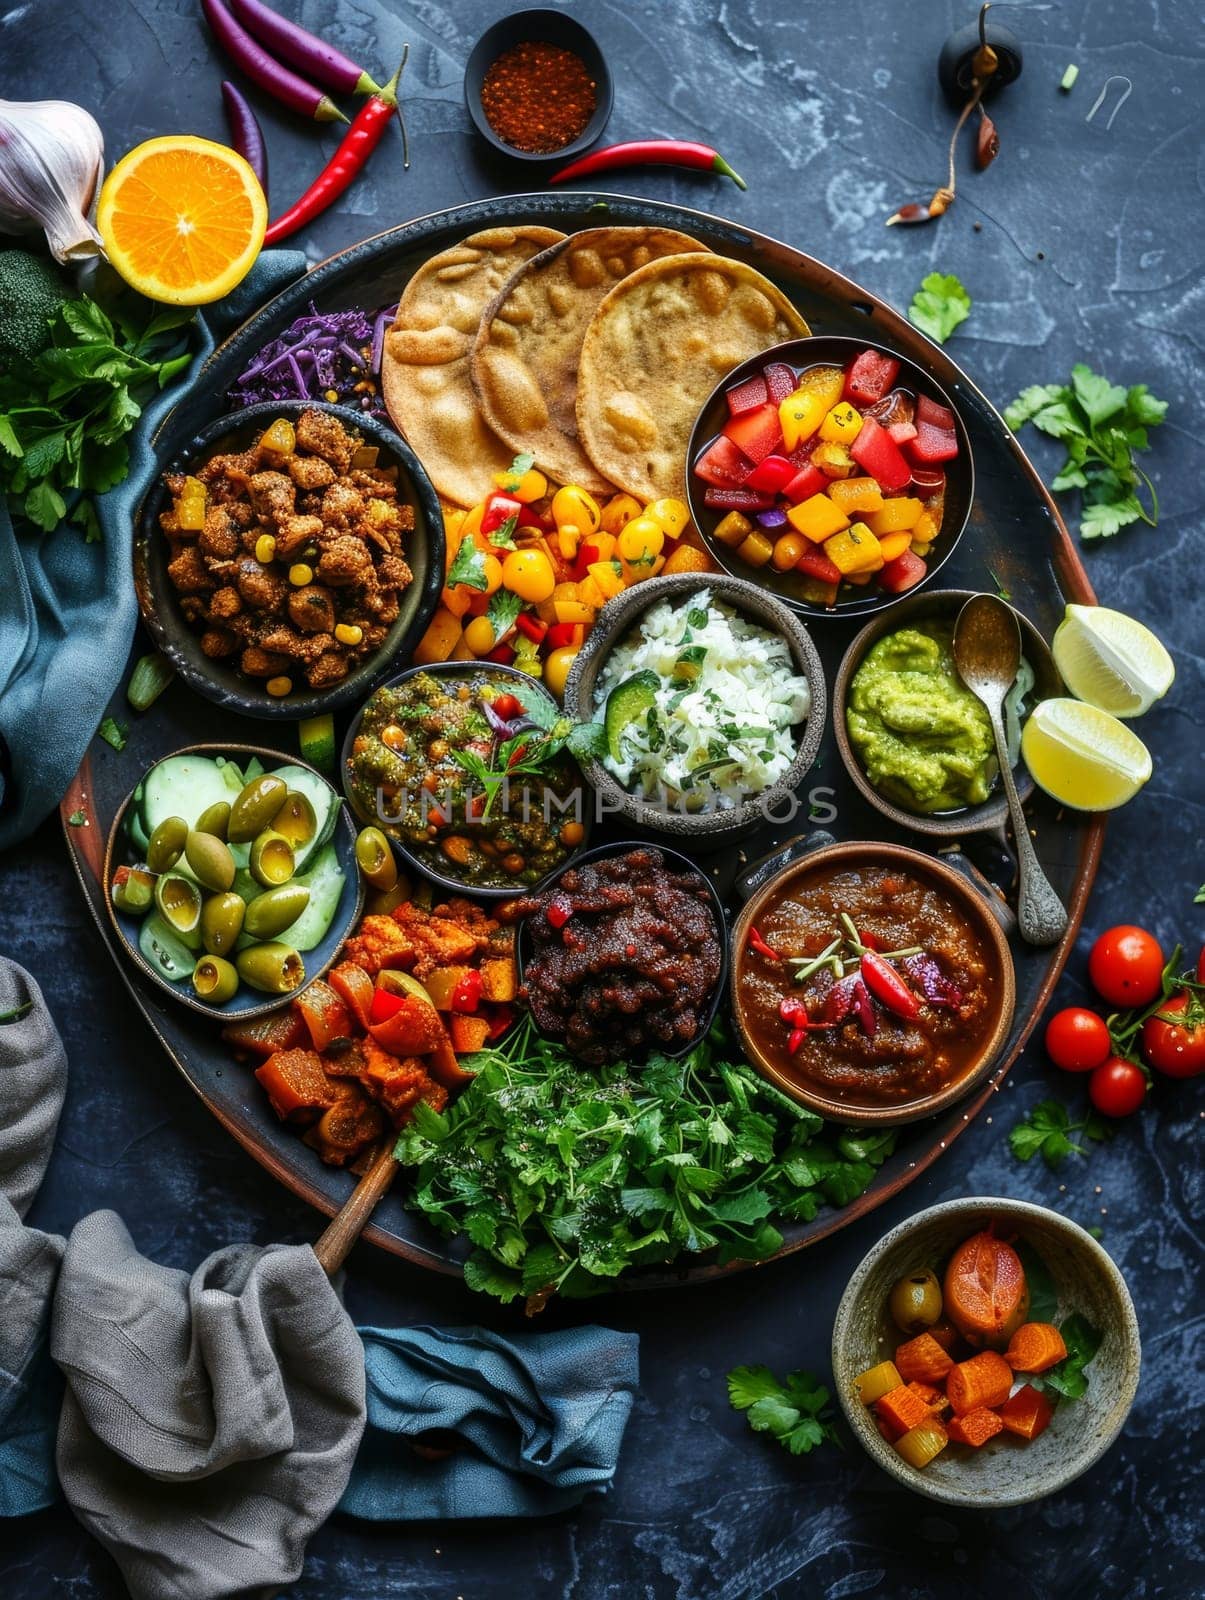 A traditional Ethiopian injera platter featuring a variety of spicy stews and vibrant vegetable side dishes. This authentic, homemade spread showcases the rich and flavorful cuisine of Ethiopia. by sfinks